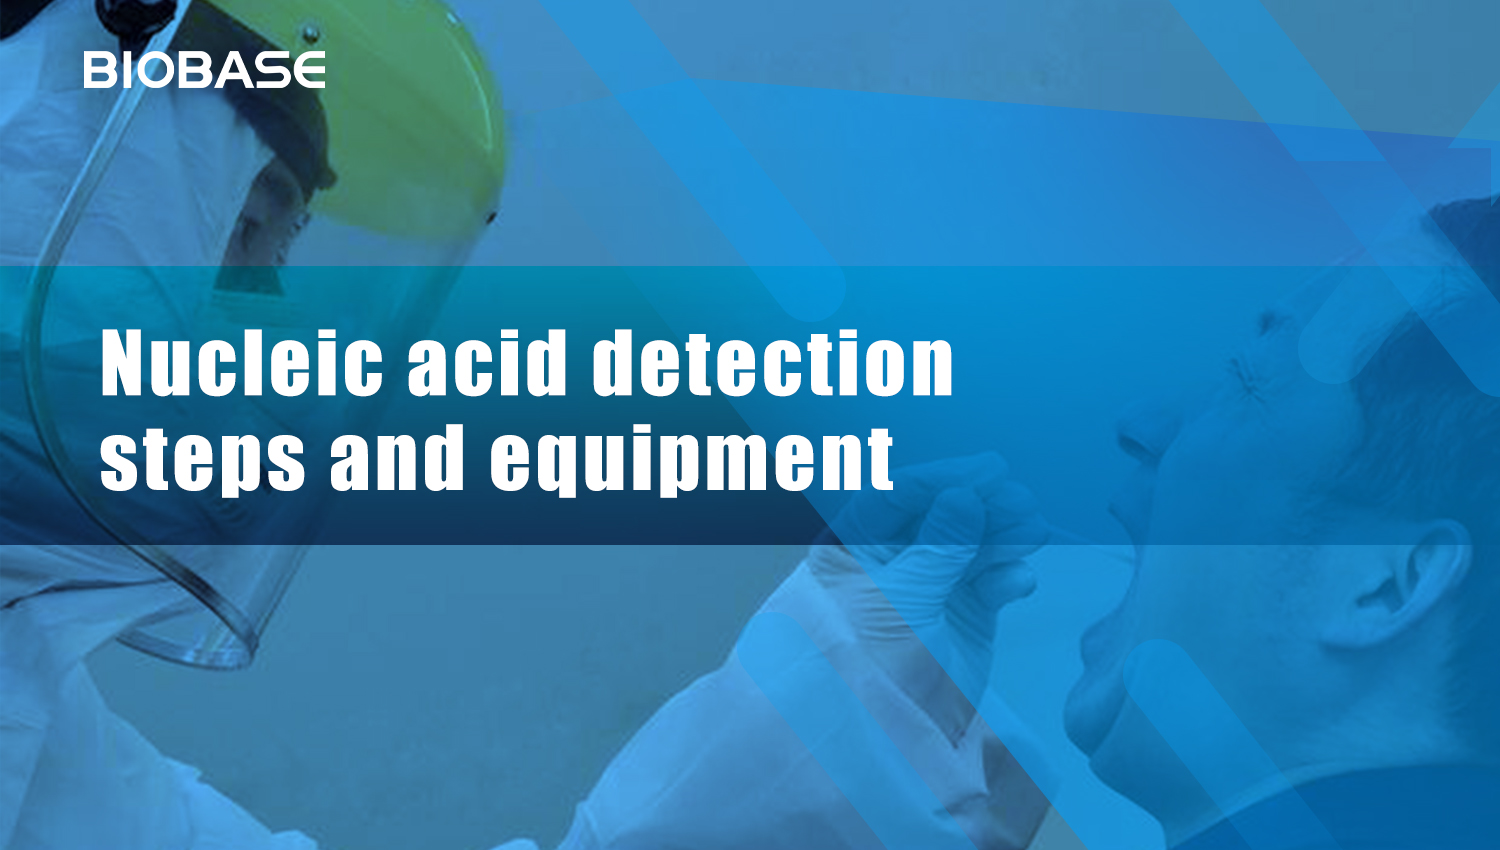 Nucleic acid detection steps and equipment